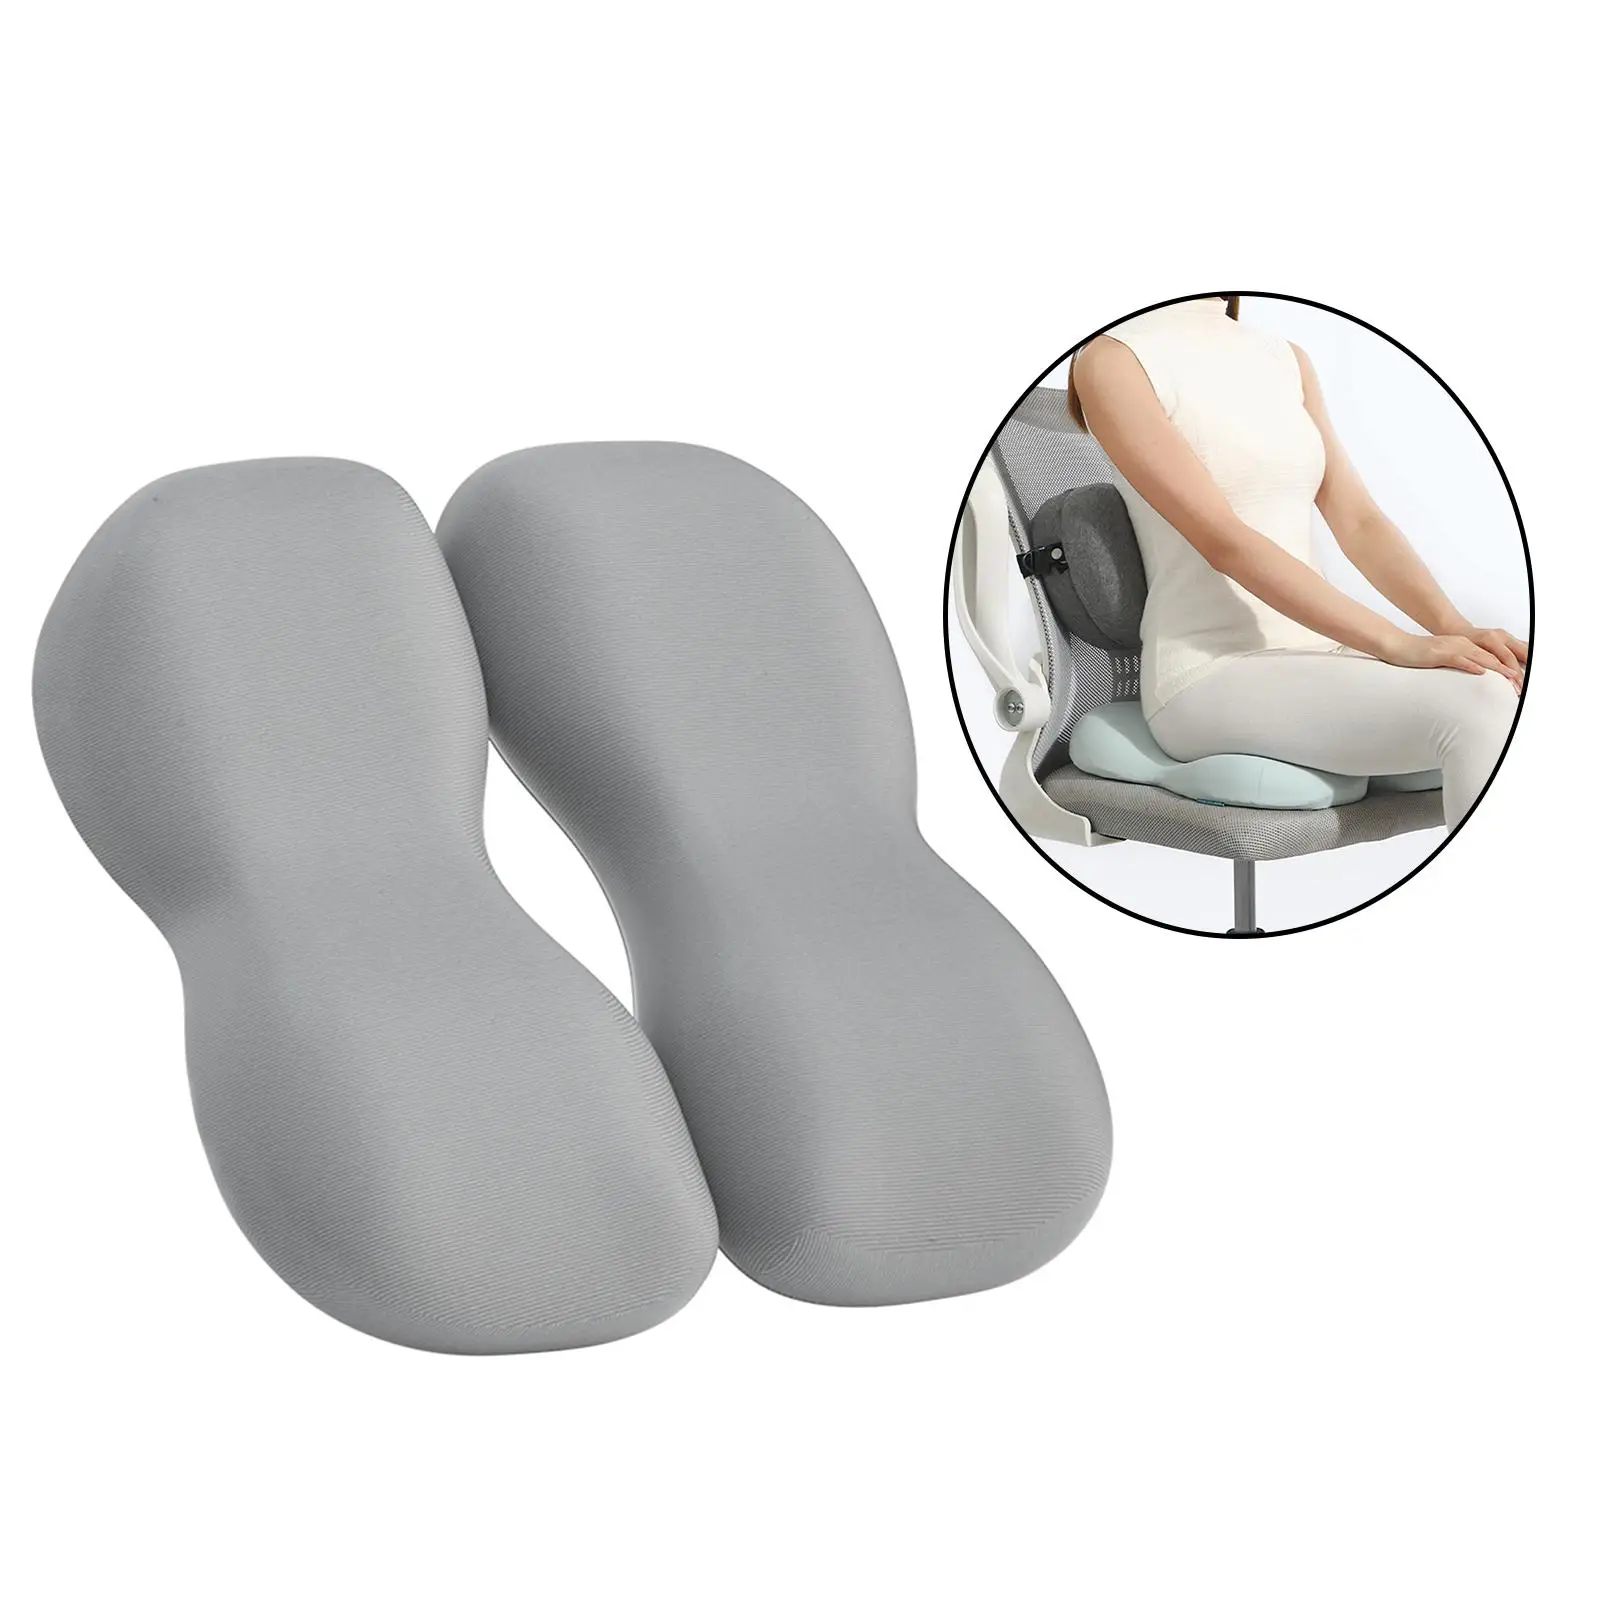 Breathable Back Seat Cushion Hip Waist Multifunctional Improve Posture Removable Elastic Strap Soft Comfortable for Home